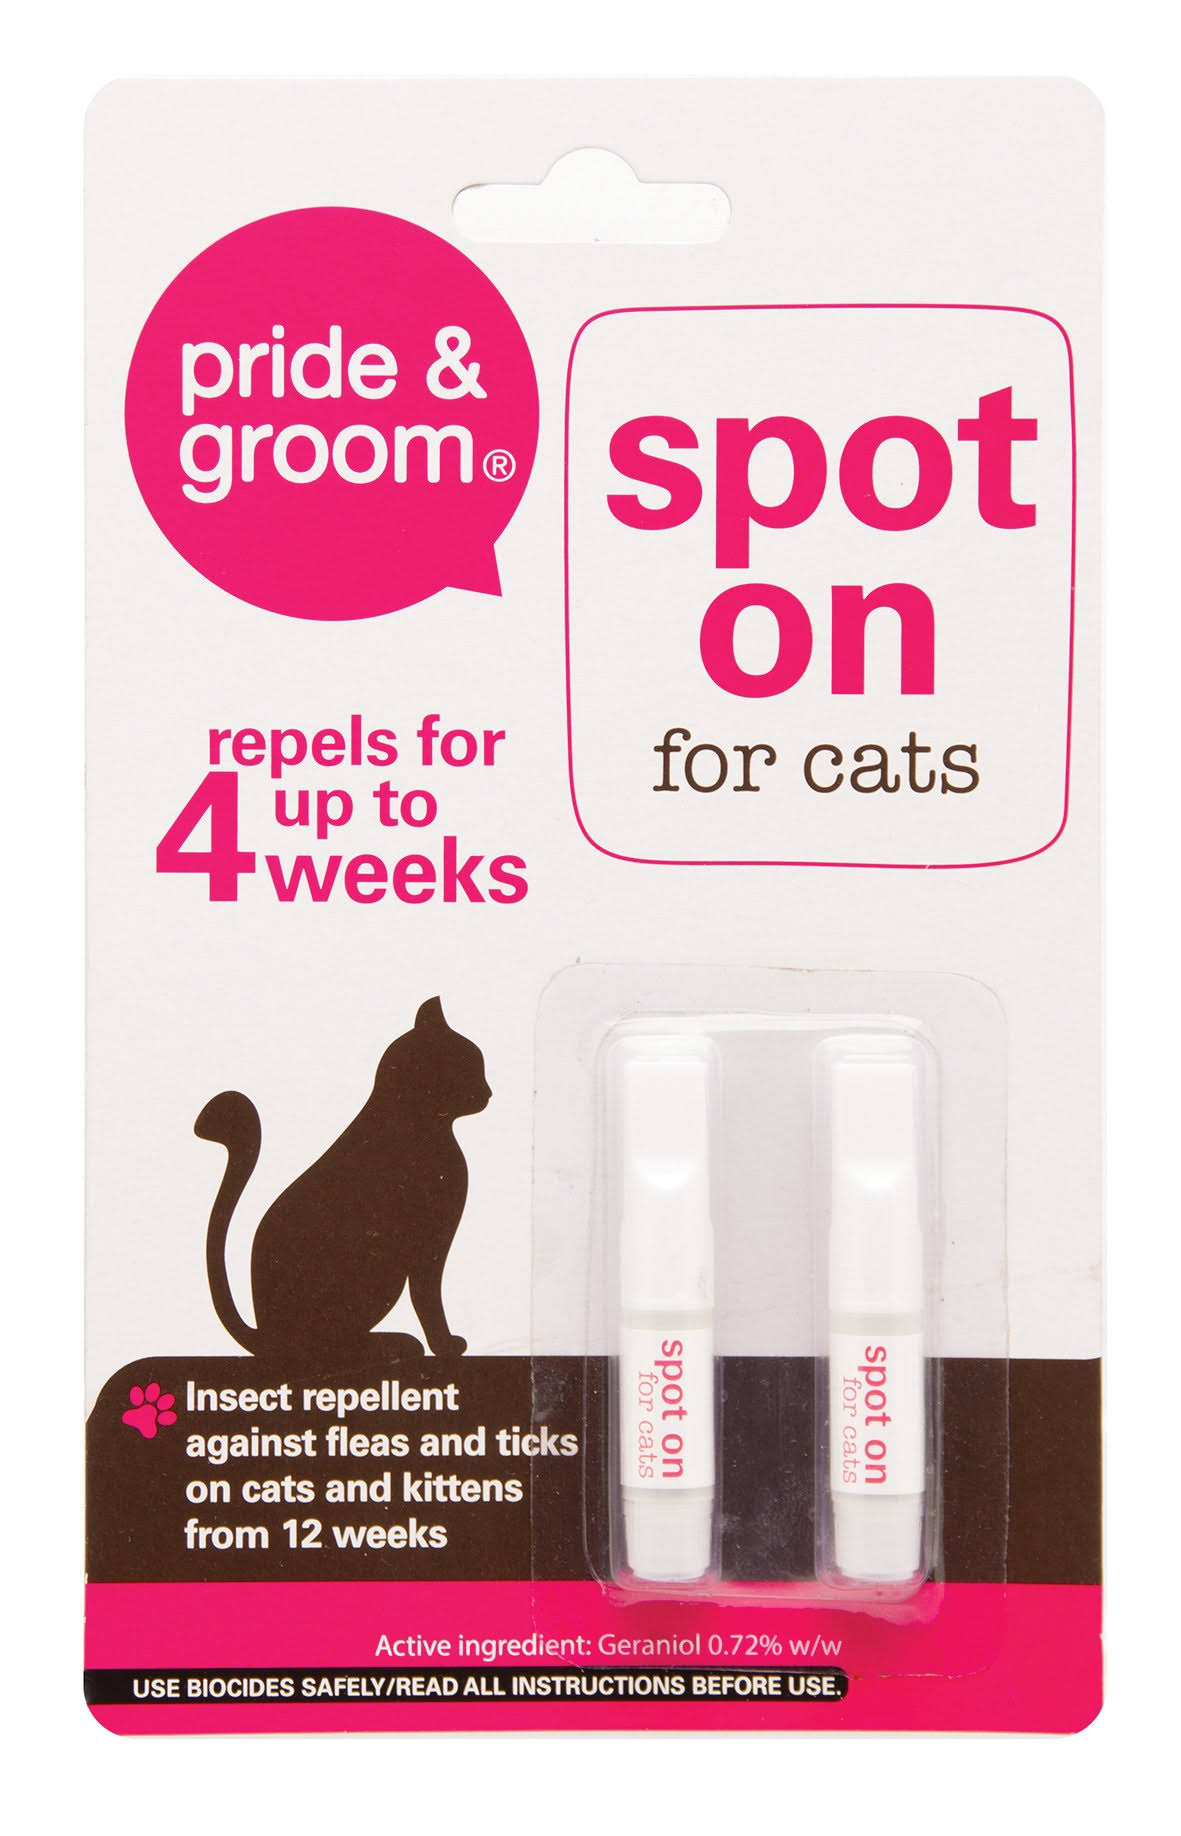 Pride & Groom Spot on for Cats